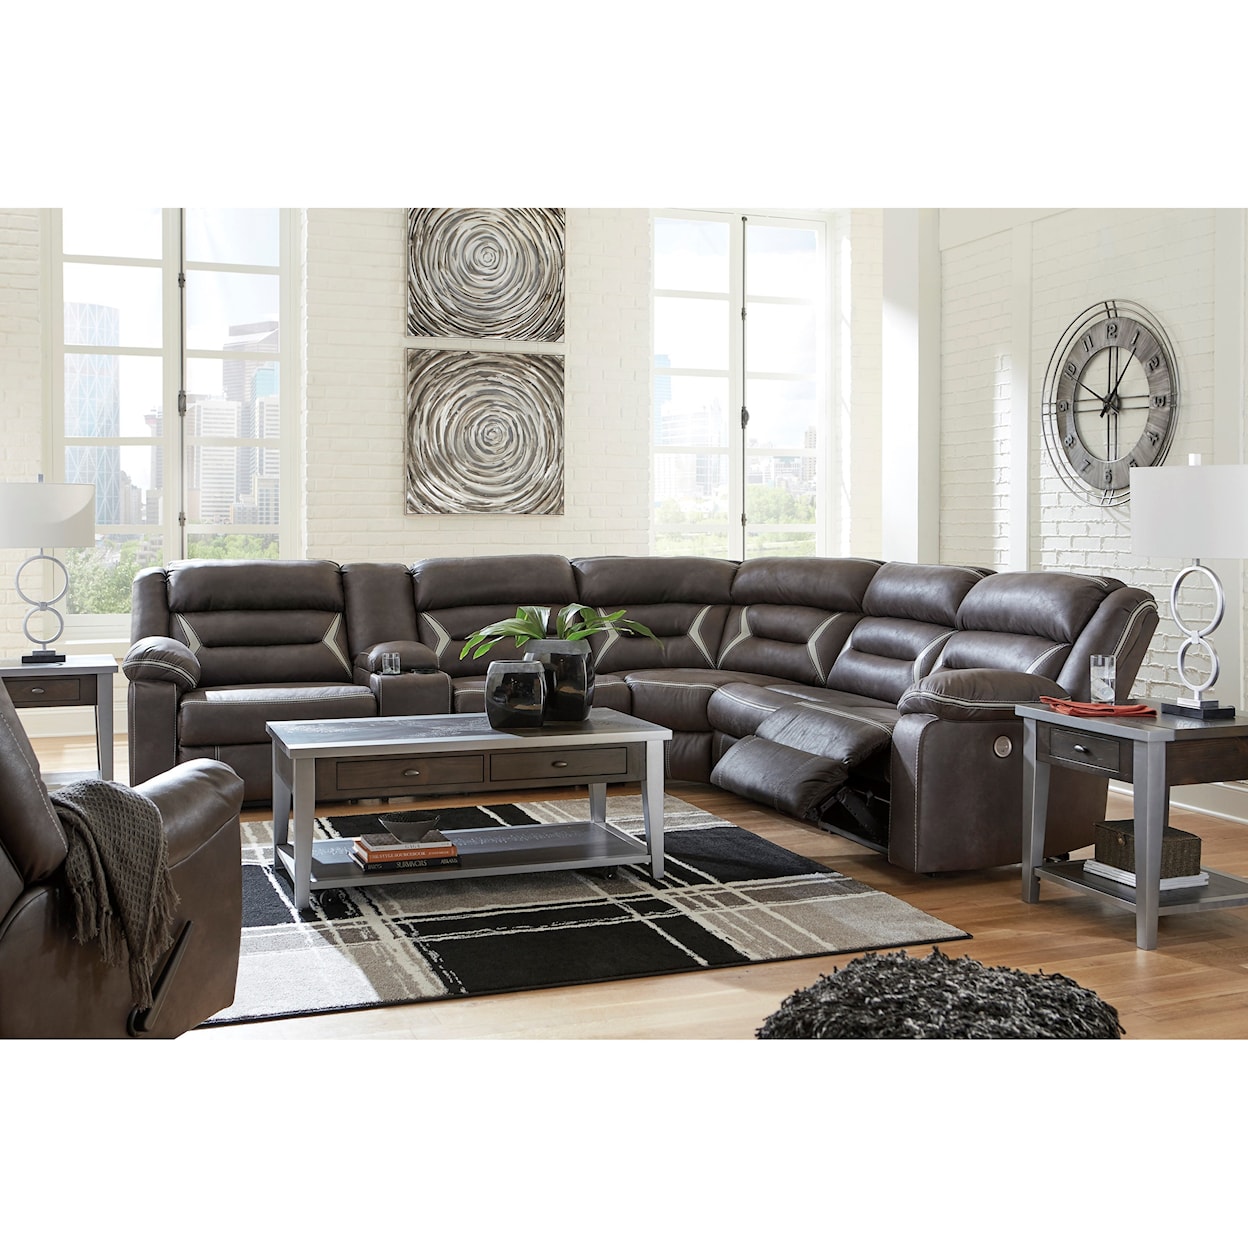 Signature Design by Ashley Furniture Kincord Power Reclining Living Room Group